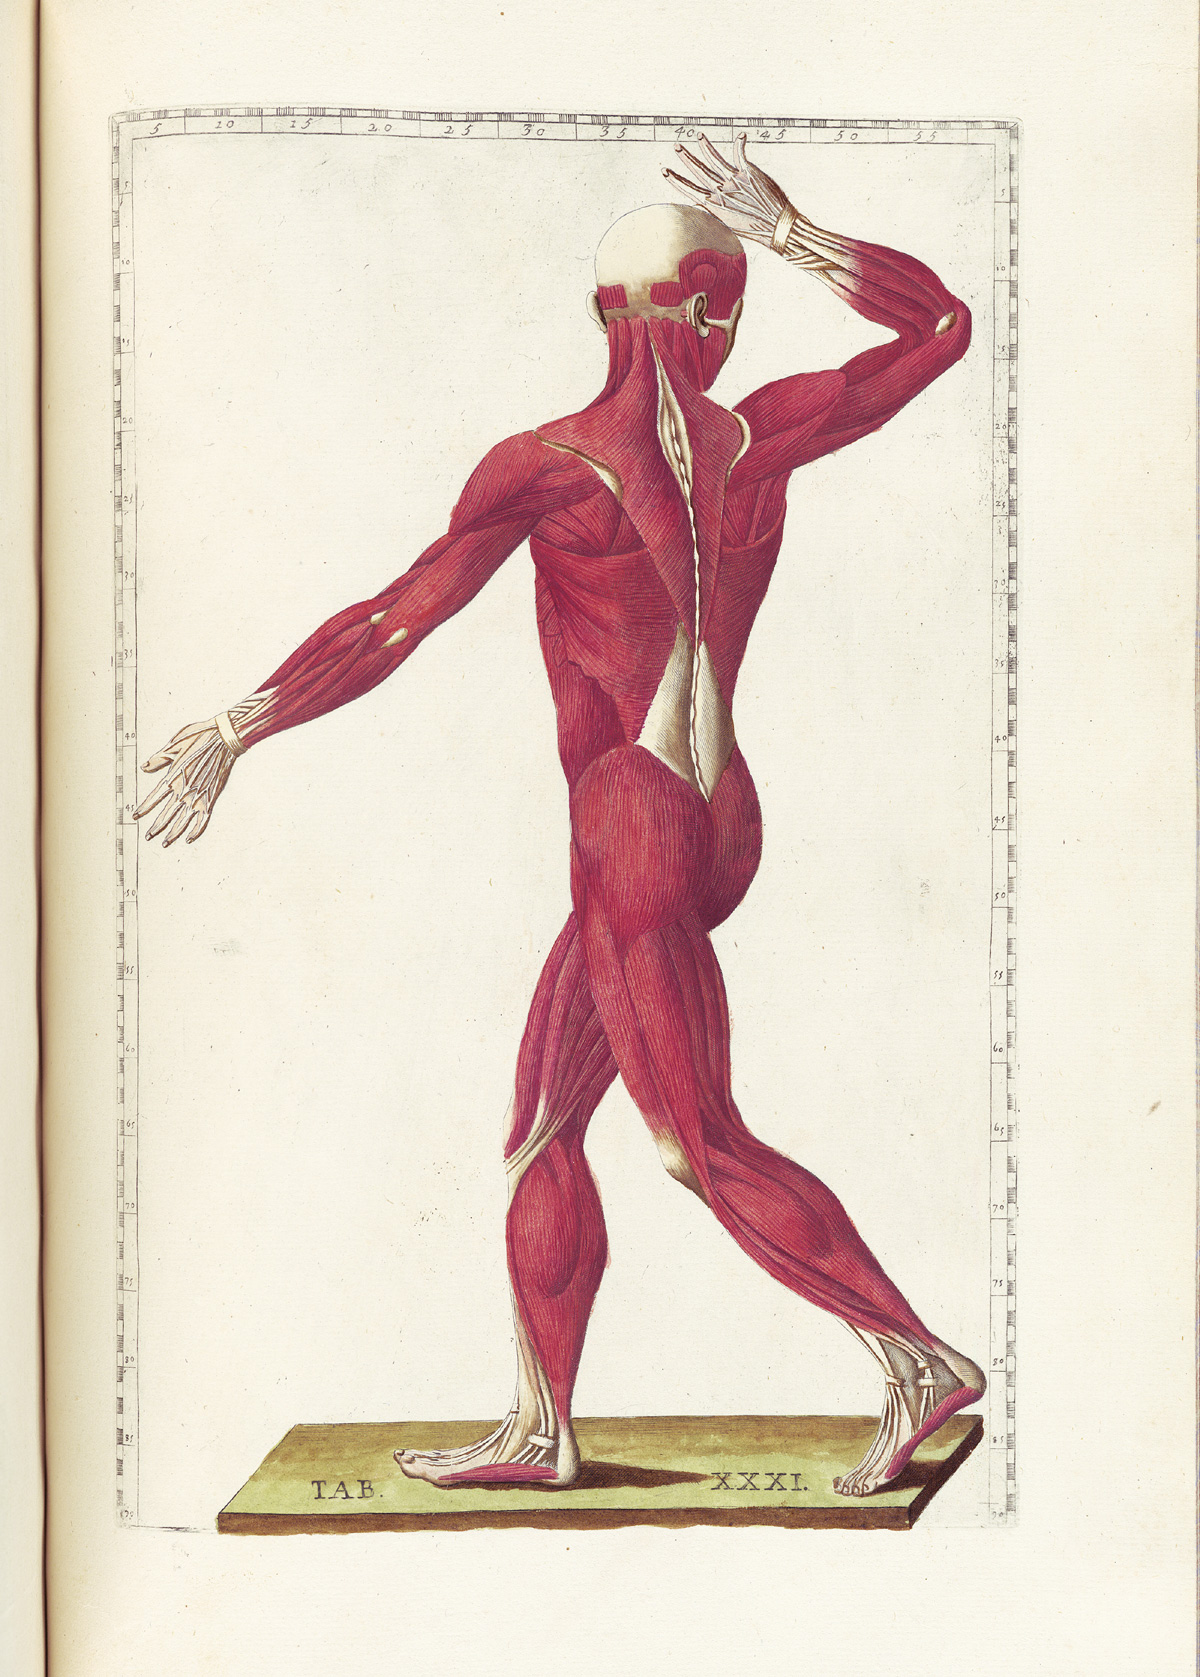 Hand-colored etching of a walking figure with flesh removed to expose the muscles; the figure is facing away from the viewer looking to the right side of the page with right arm raised and bent at the elbow and touching his forehead with palm out; from Bartholomeo Eustachi’s Tabulae anatomicae, NLM Call no.: WZ 260 E87t 1783.